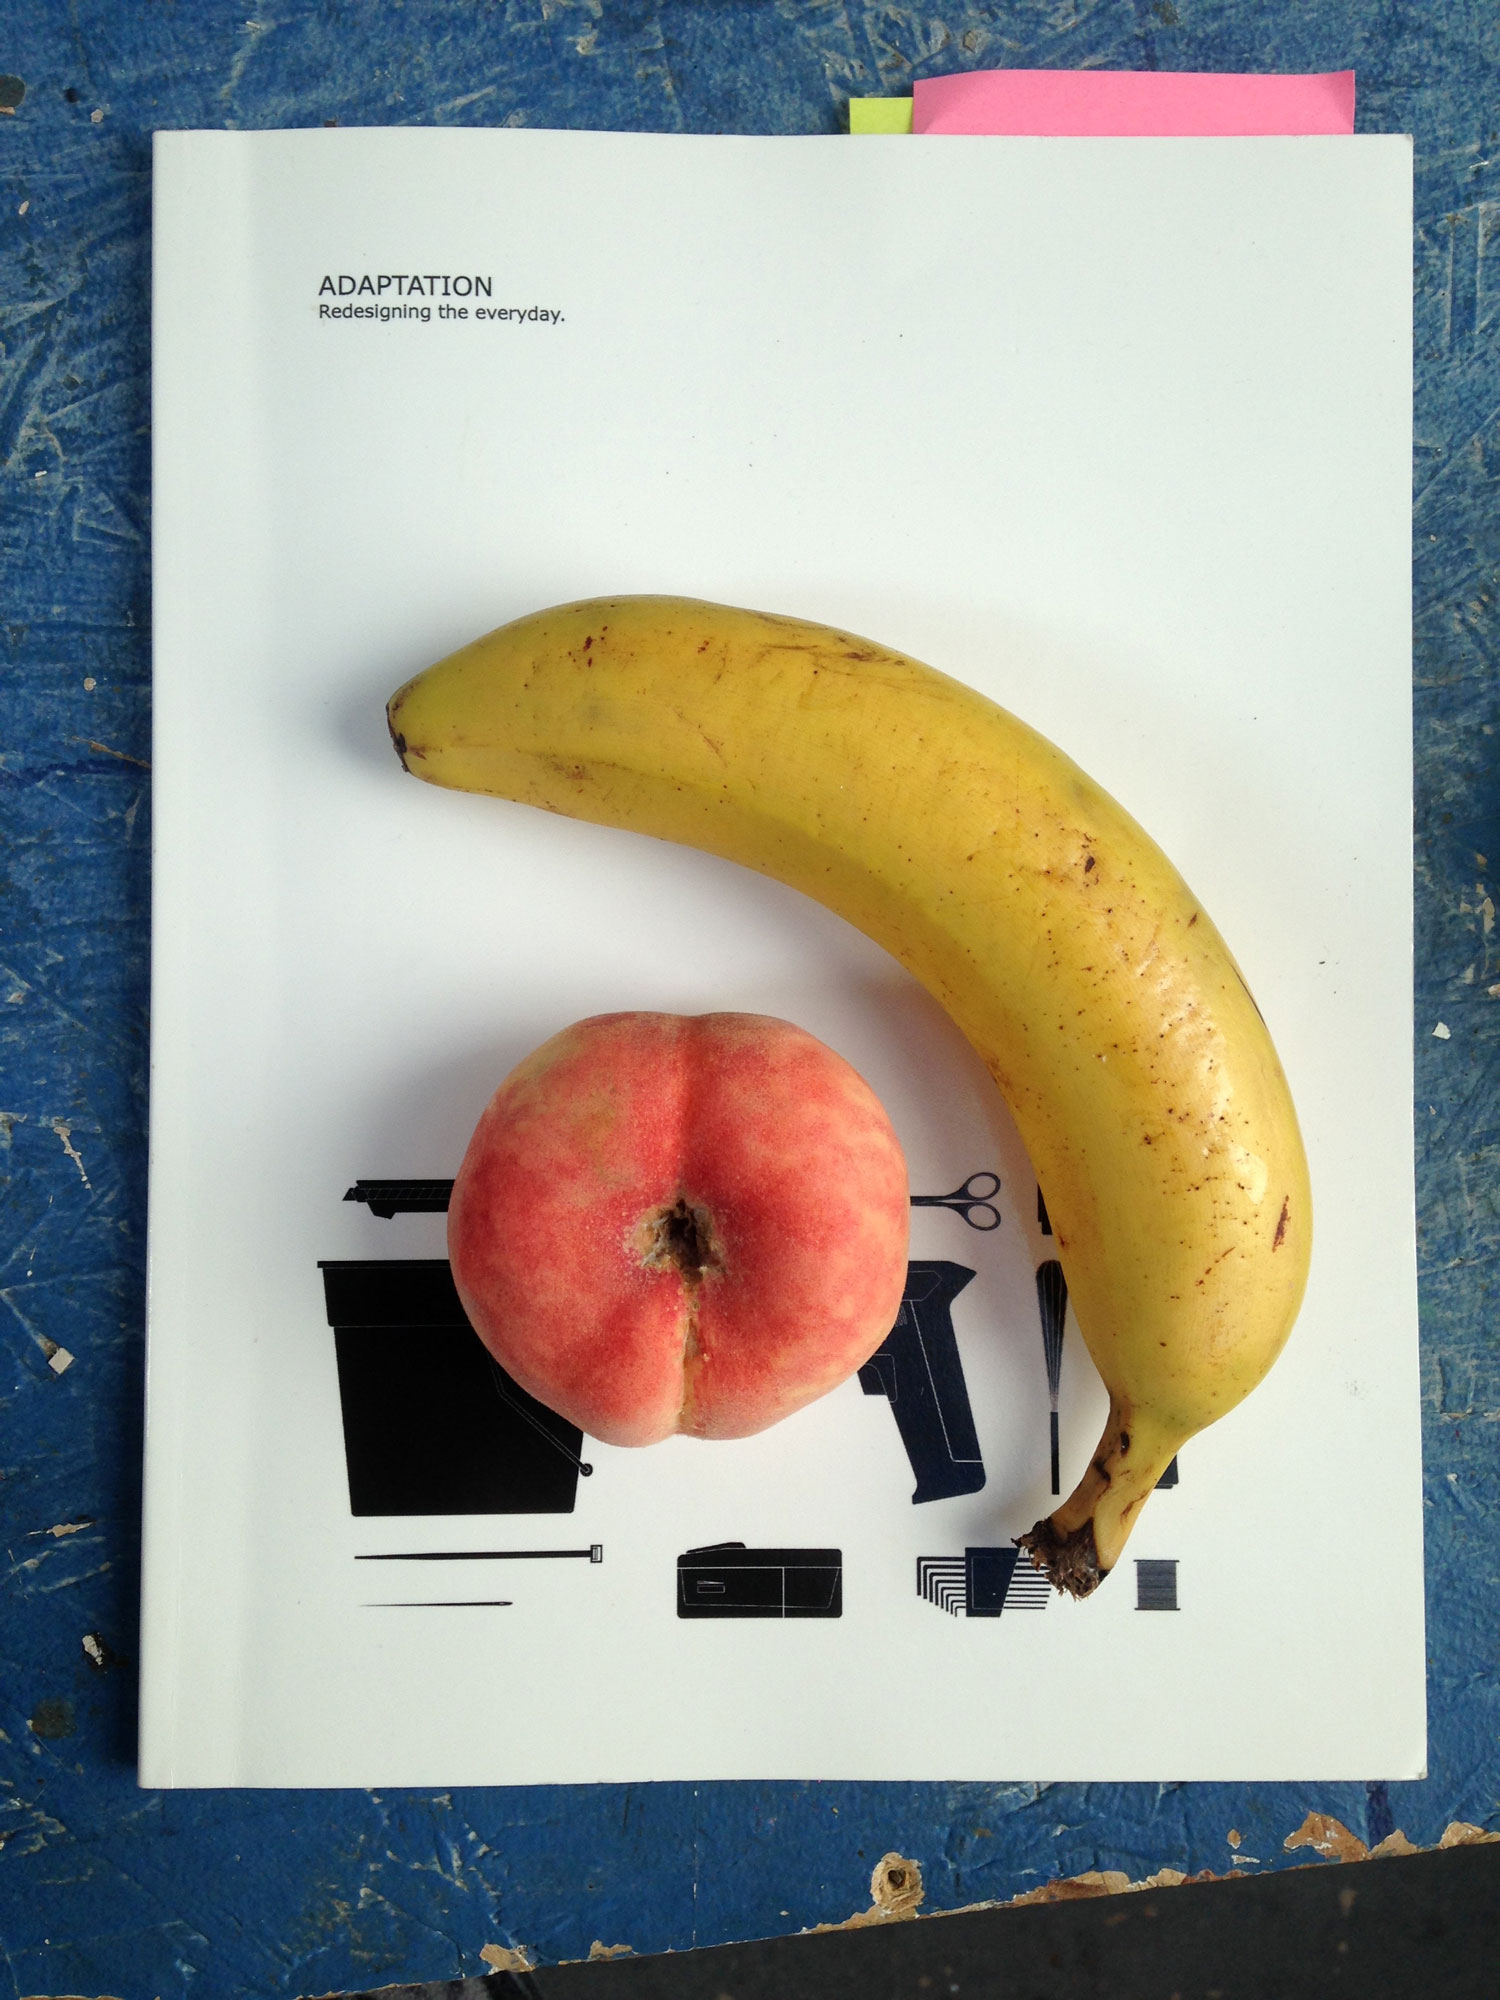 Adaptation: Redesigning the Everyday book with banana and peach placed on top